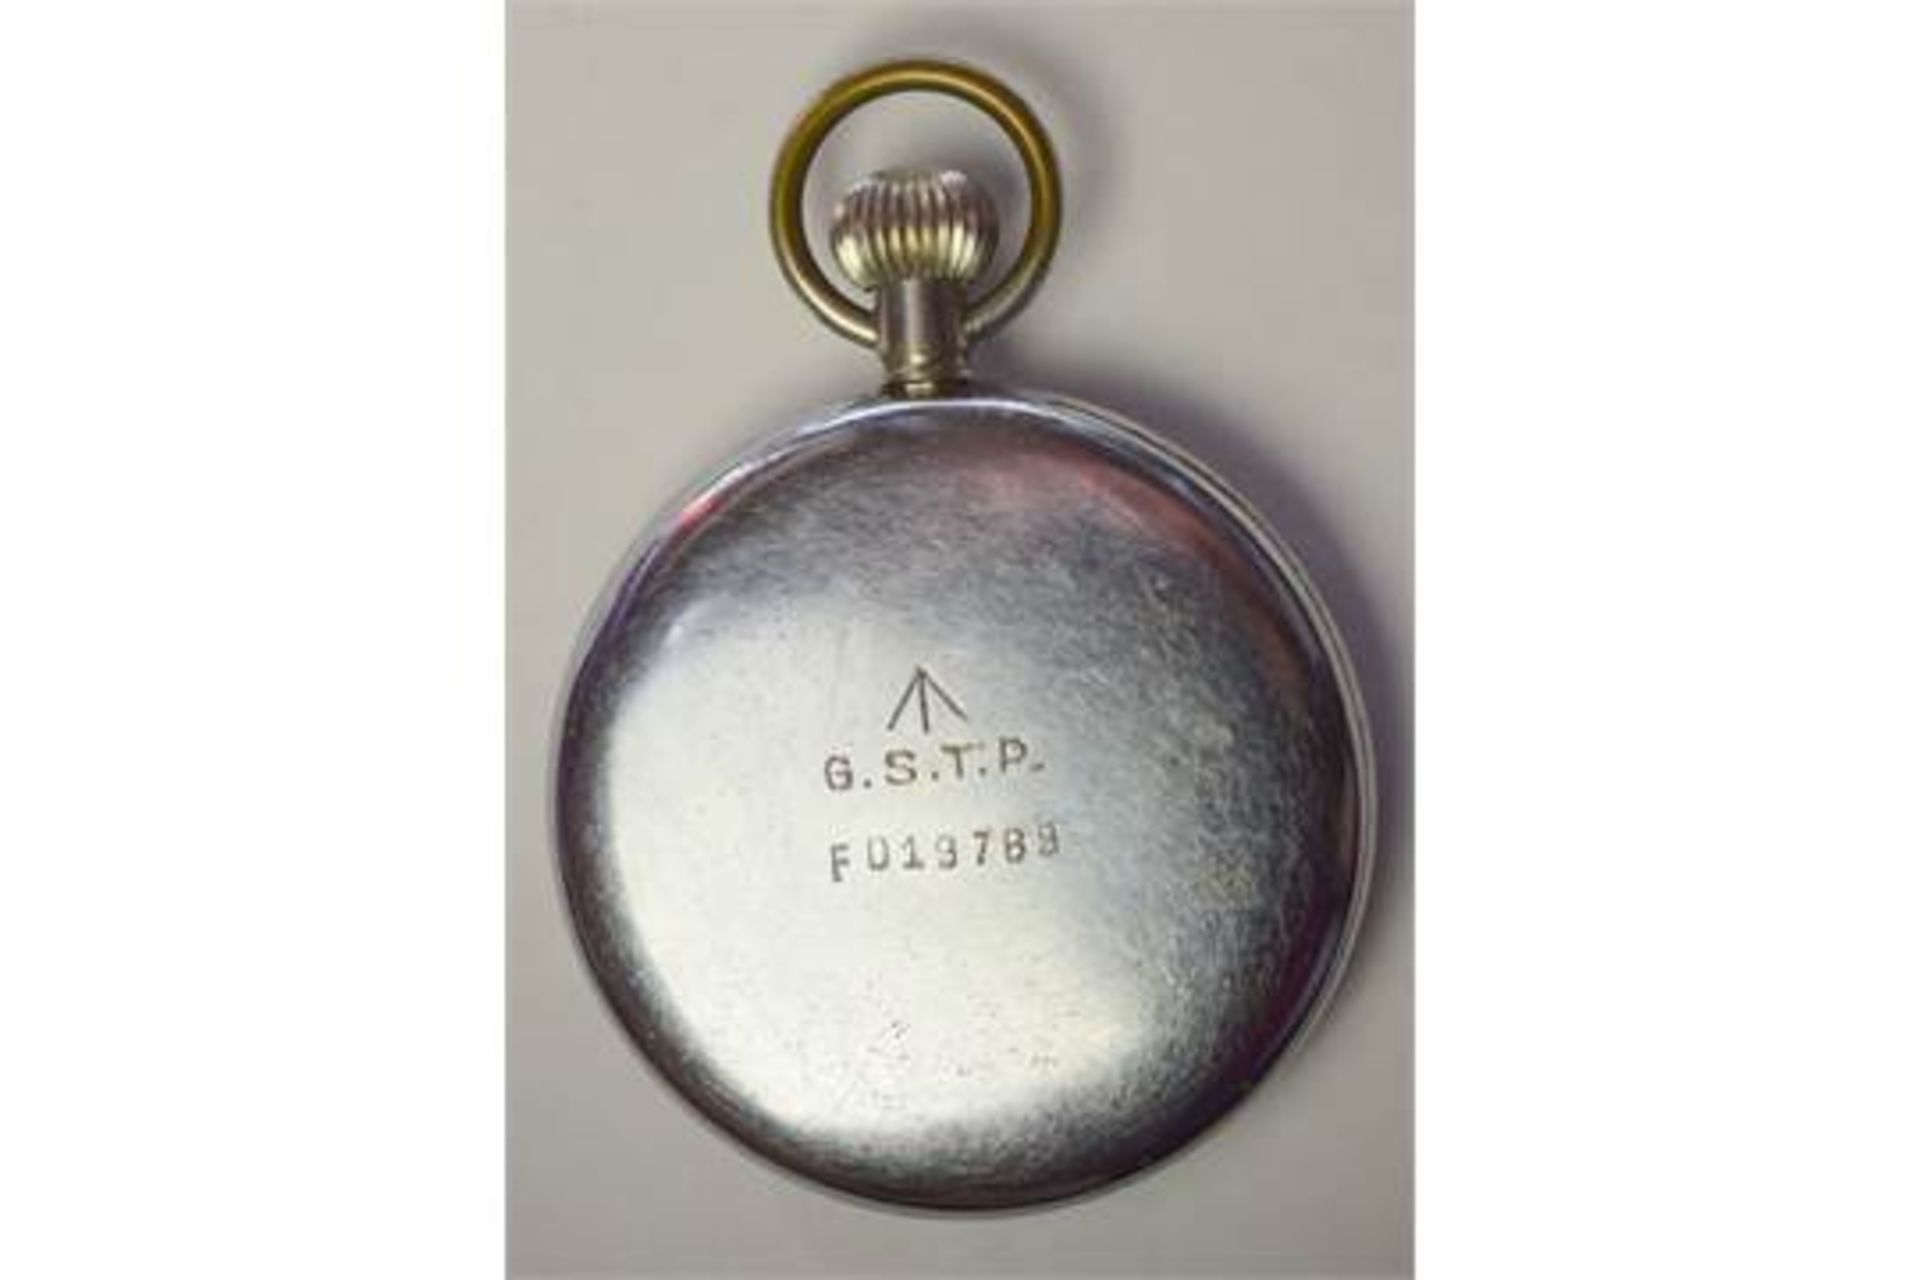 WW2 Jaeger LeCoultre GSTP Military Pocket Watch ***reserve lowered*** - Image 2 of 3